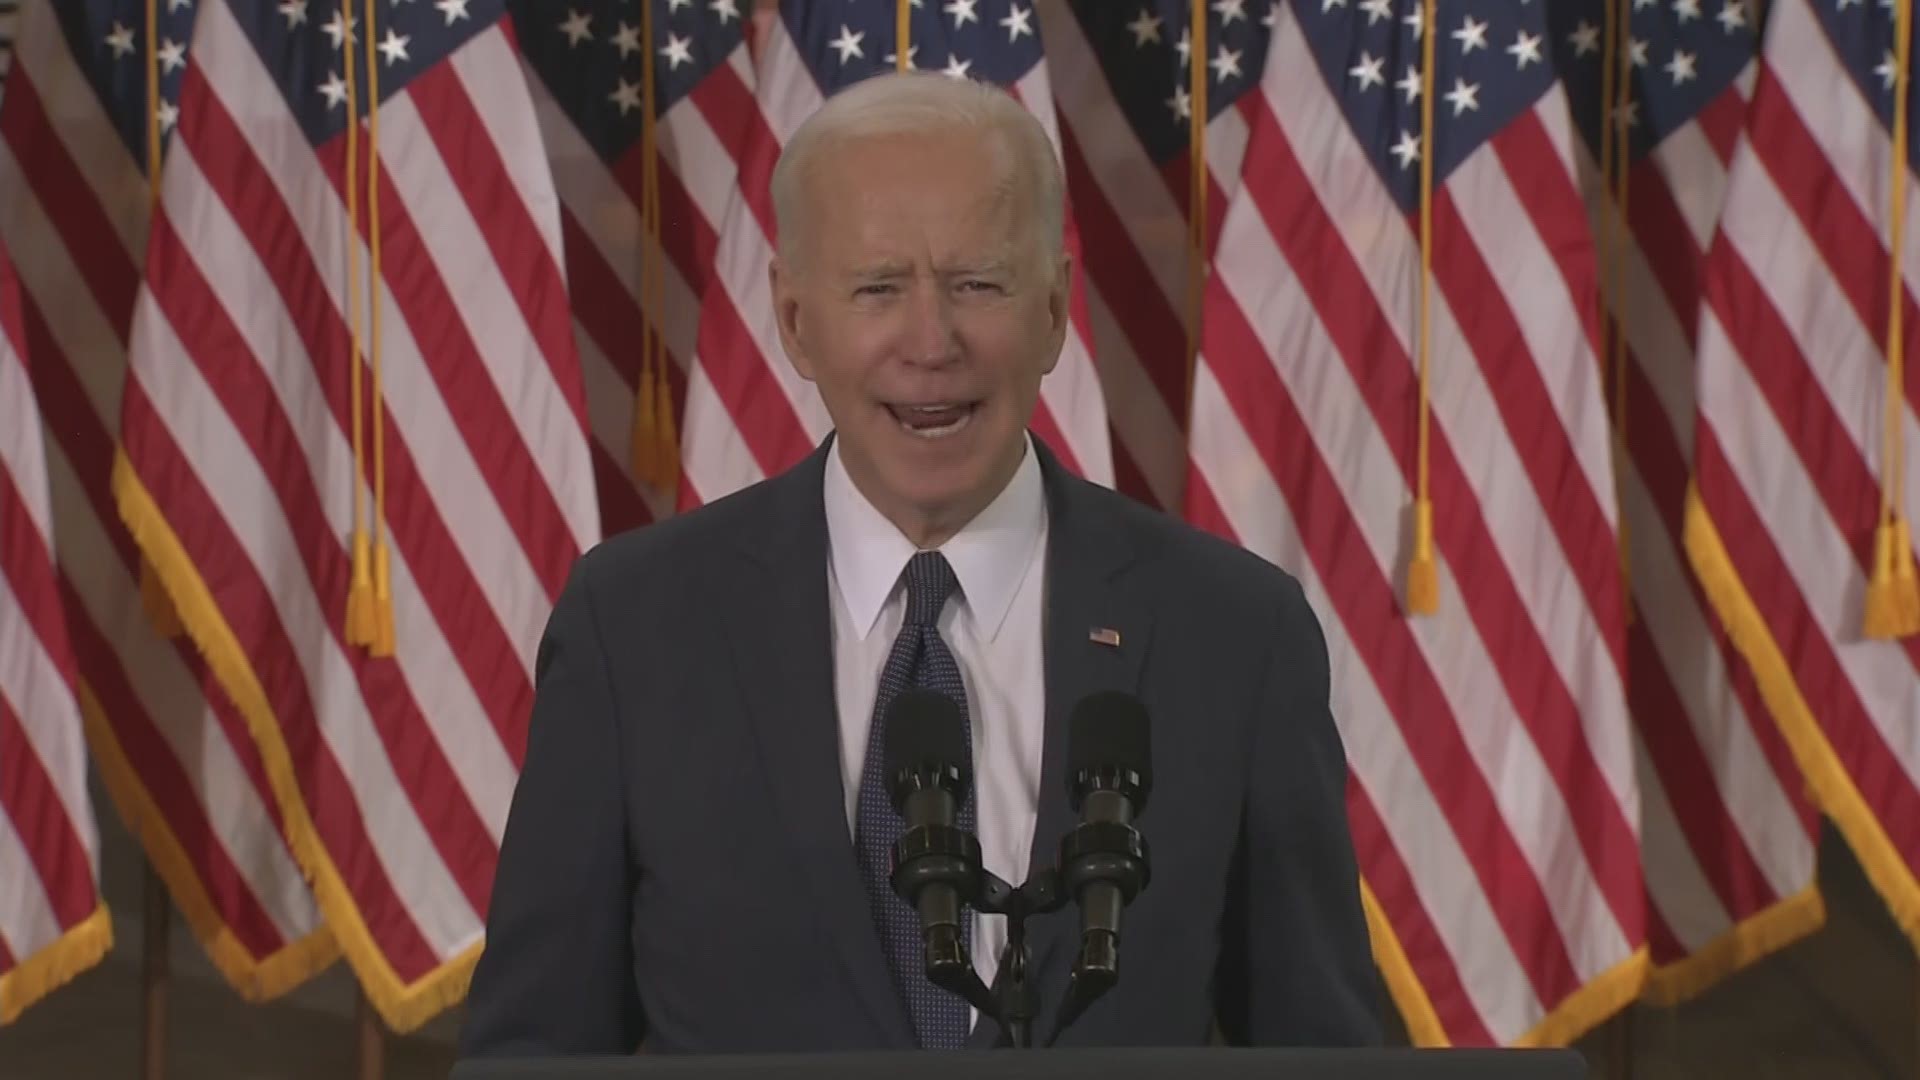 Joe Biden is pushing a massive $2 trillion bill to increase taxes to help provide millions for improvements on roads, bridges and transition to clean energy.